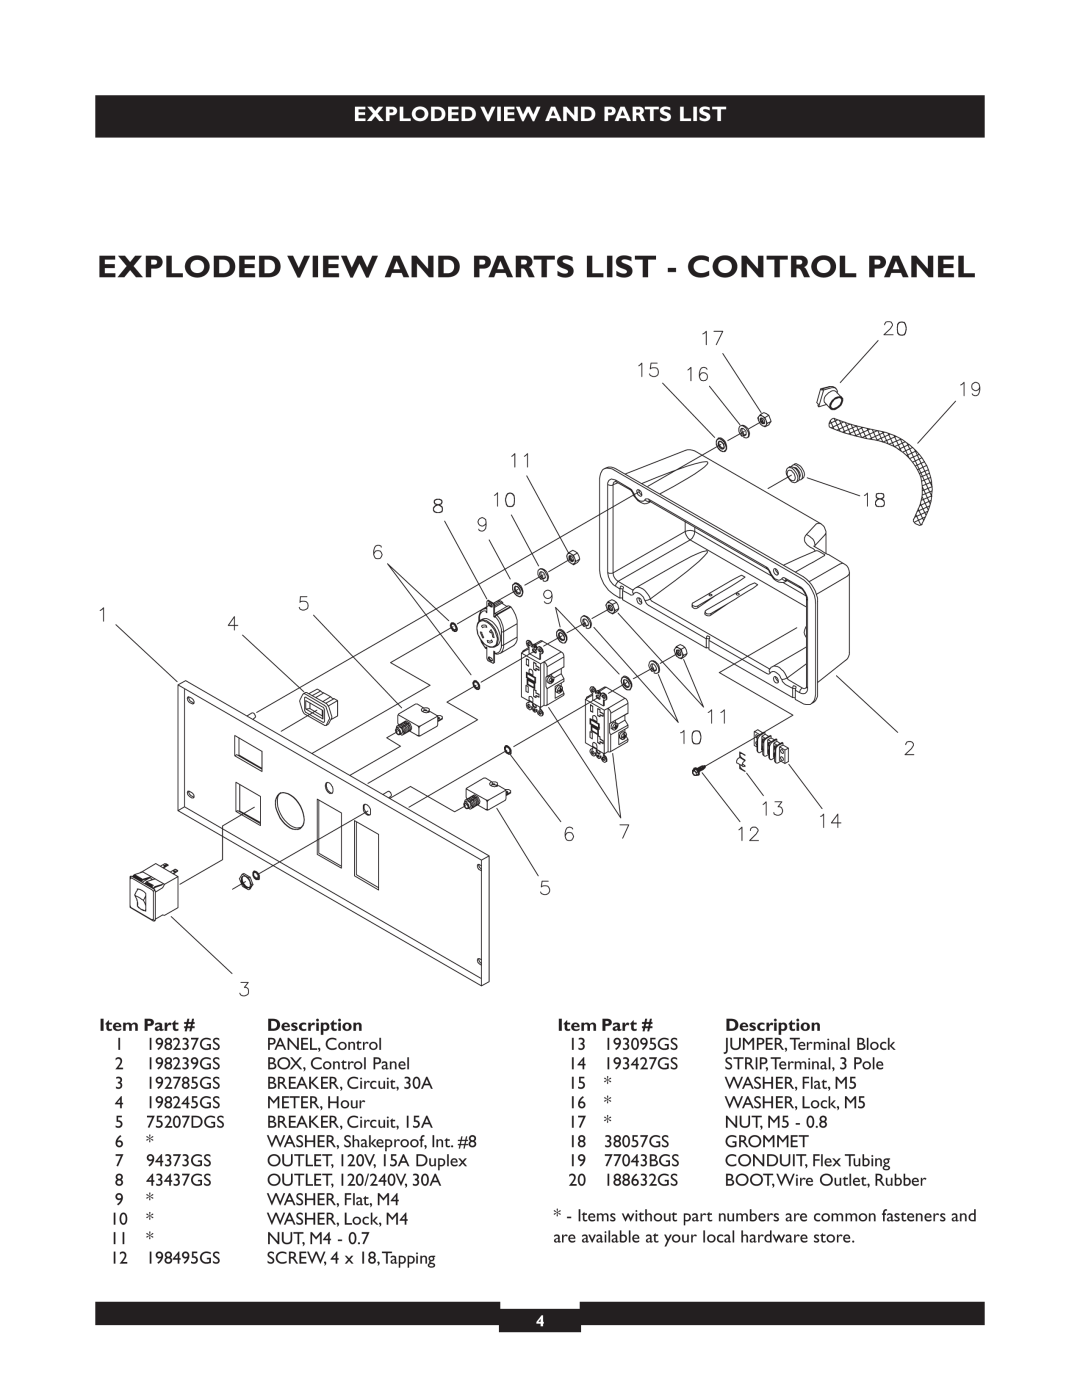 Briggs & Stratton 30254 manual Exploded View And Parts List - Control Panel, Description 